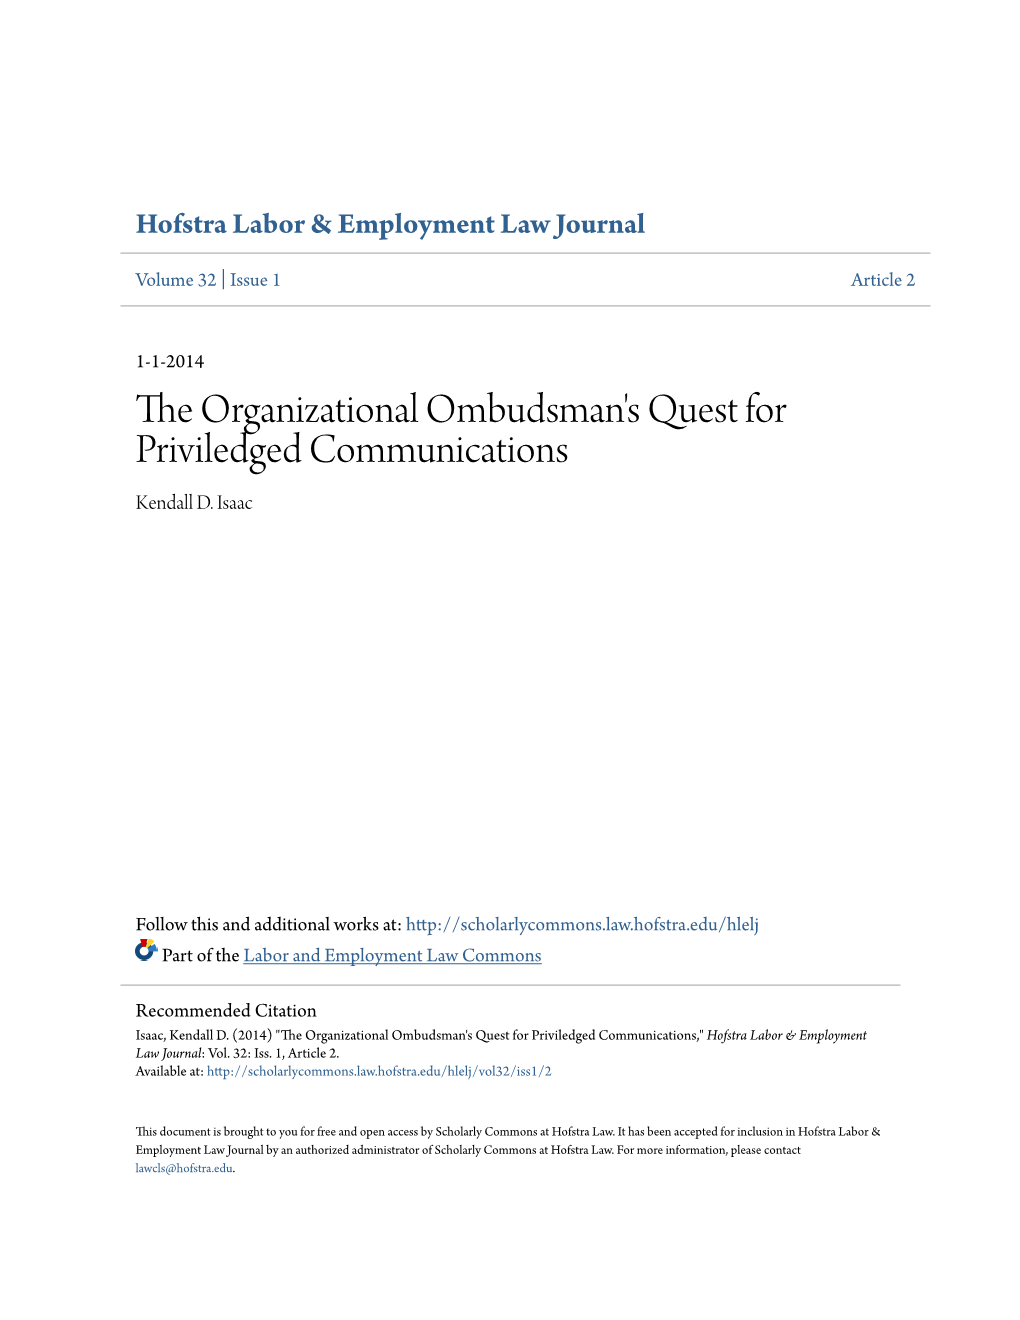 The Organizational Ombudsman's Quest for Priviledged Communications Kendall D